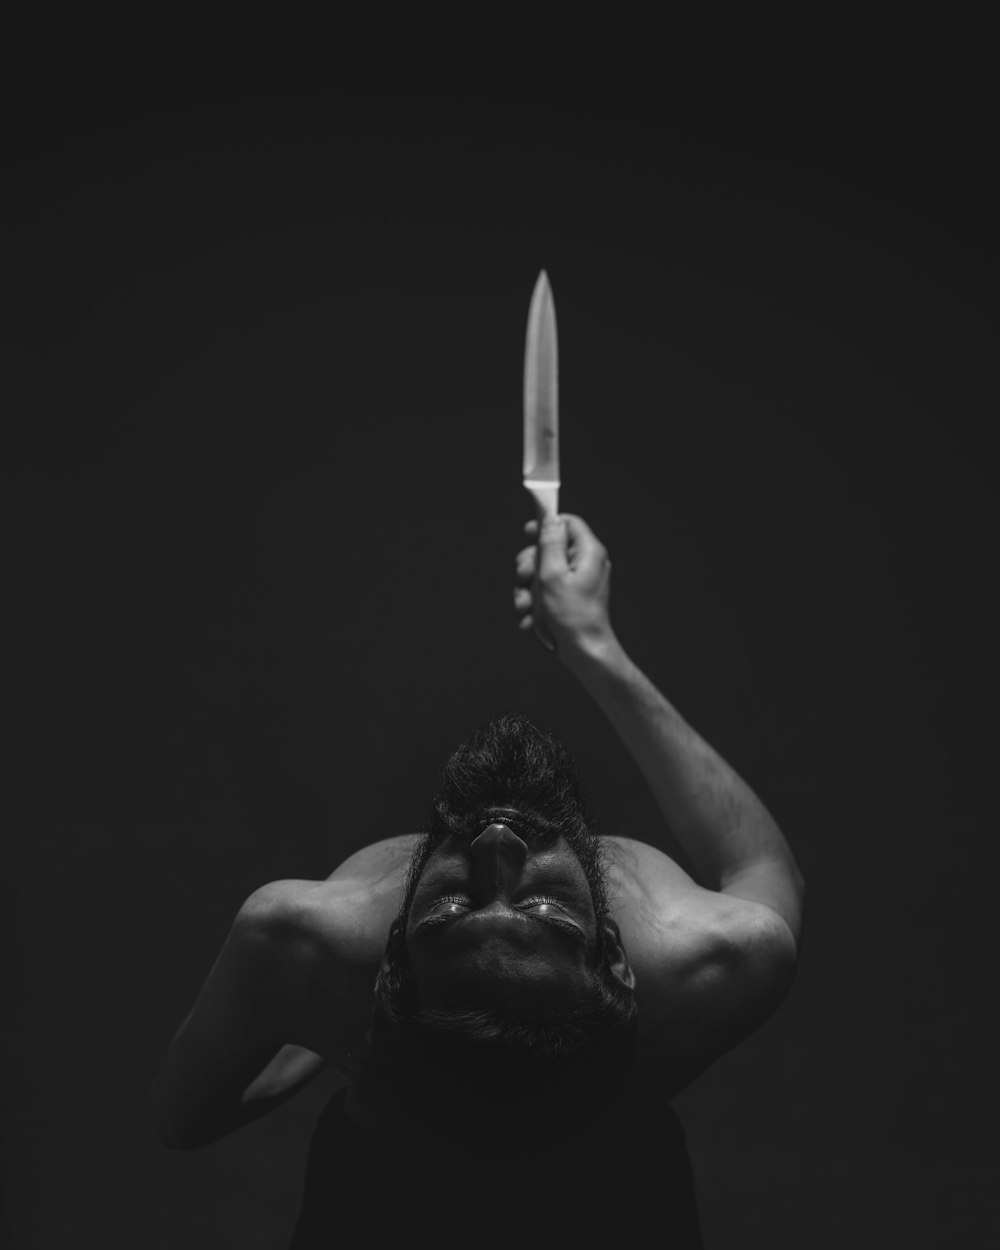 grayscale photography of man holding knife